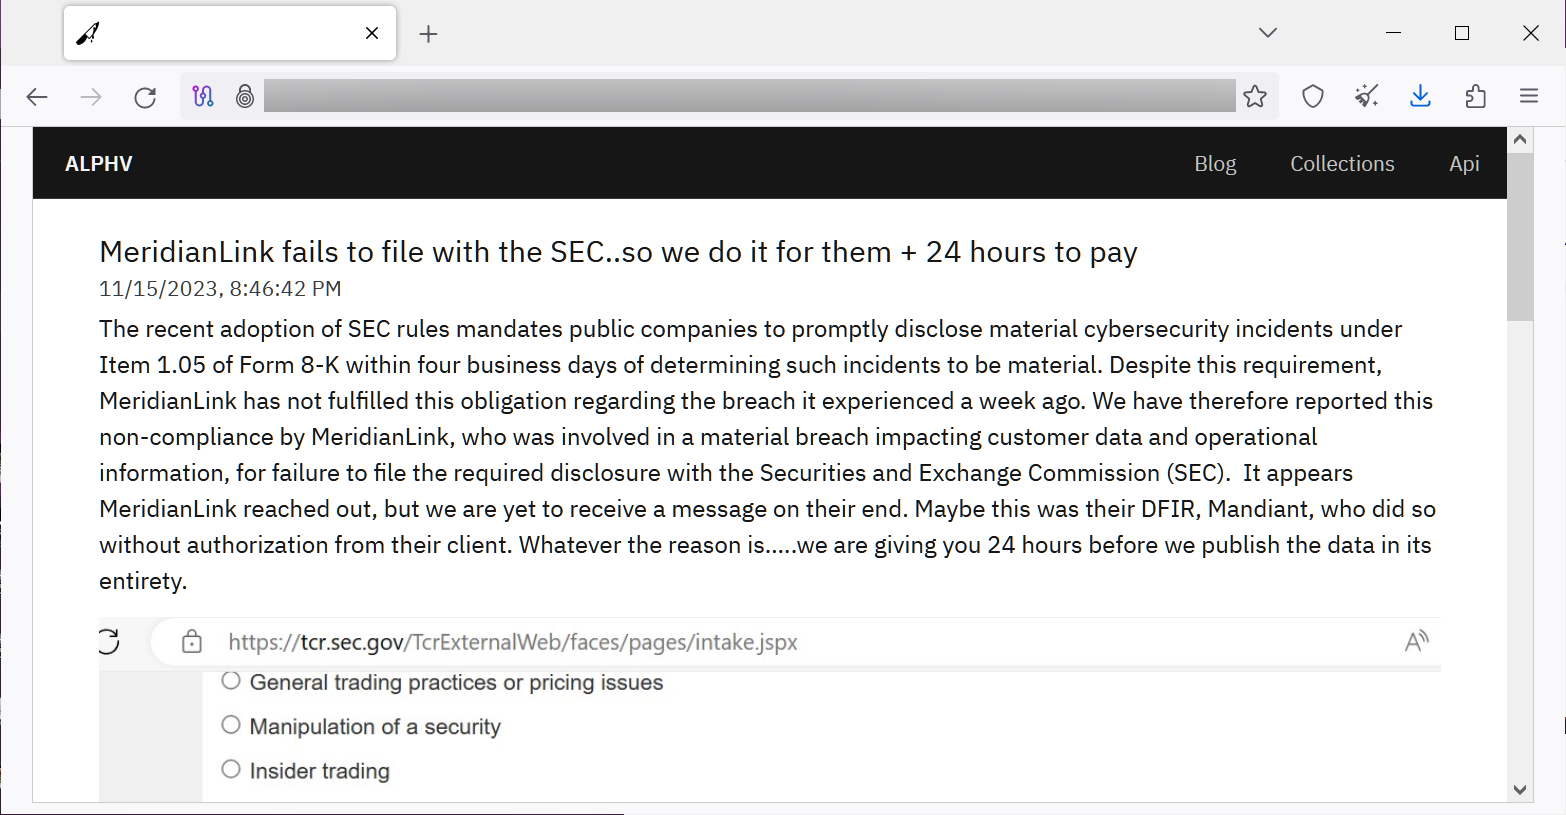 ALPHV ransomware irritated by MeridianLink's silence